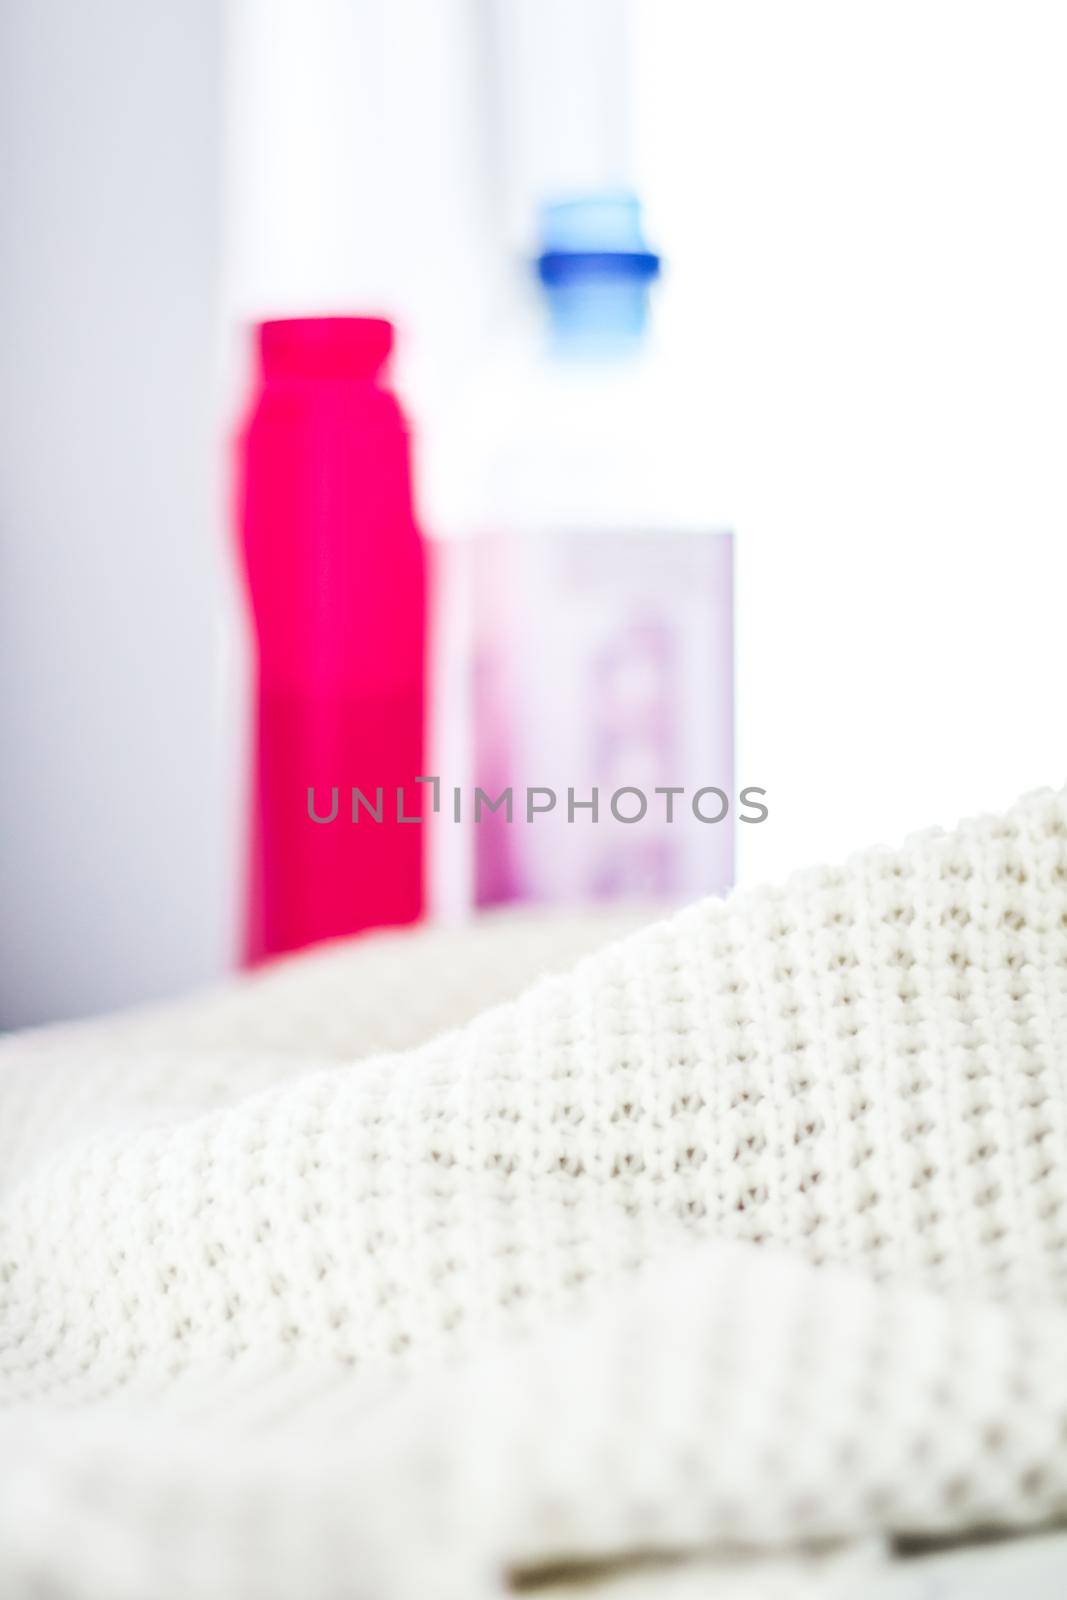 Housekeeping, fabric textures and handmade knitwear concept - Warm knitted clothes and liquid laundry detergent